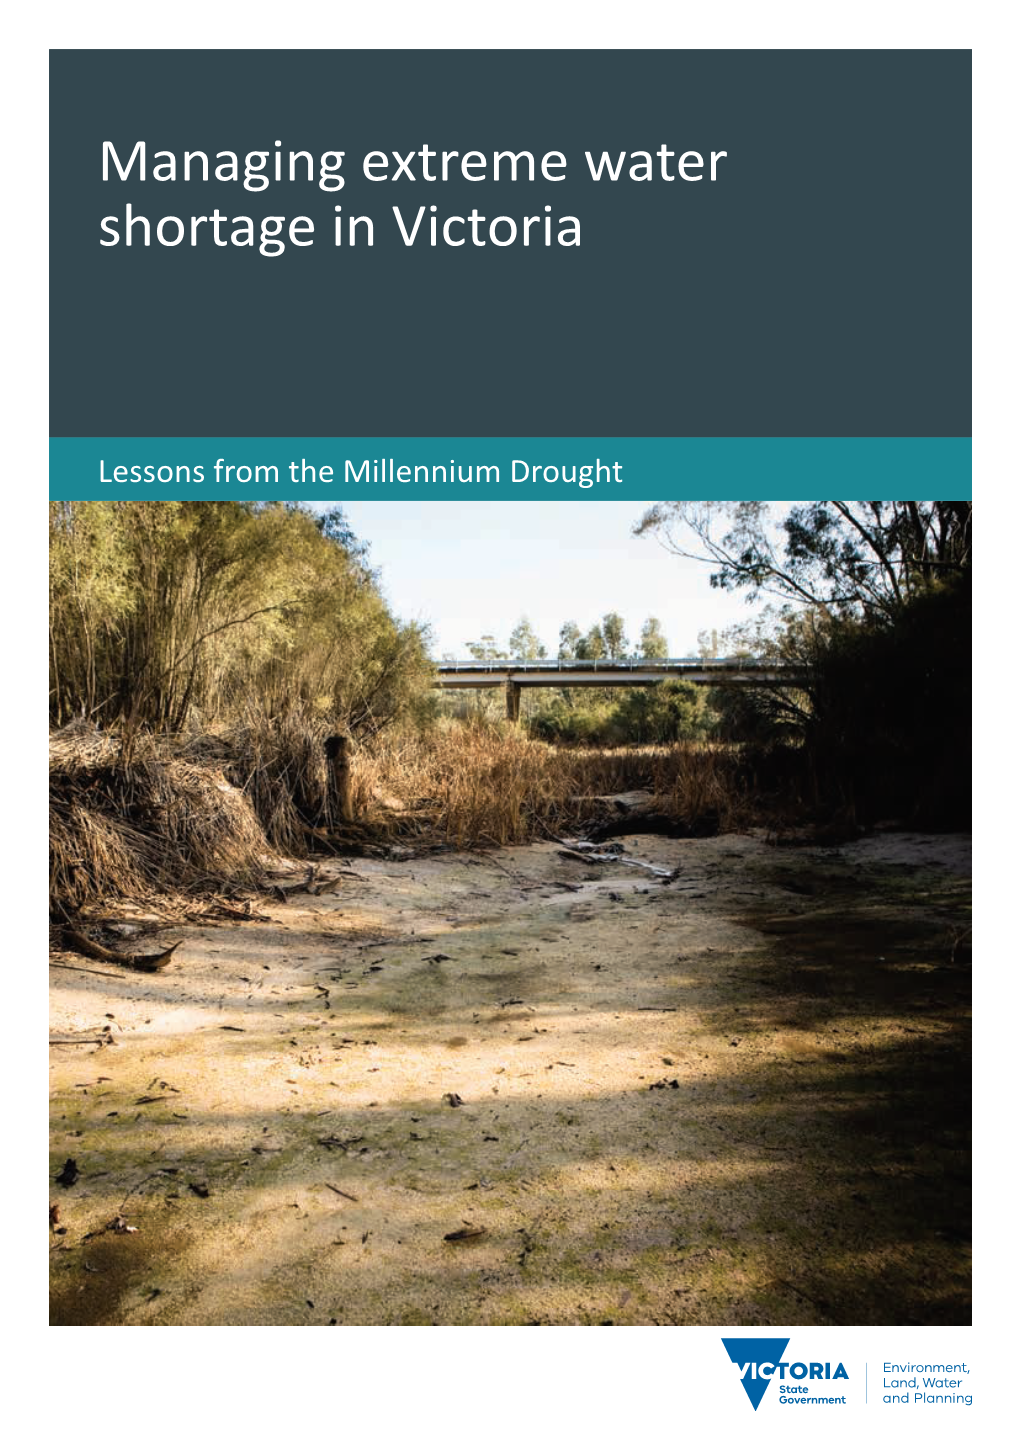 Managing Extreme Water Shortage in Victoria